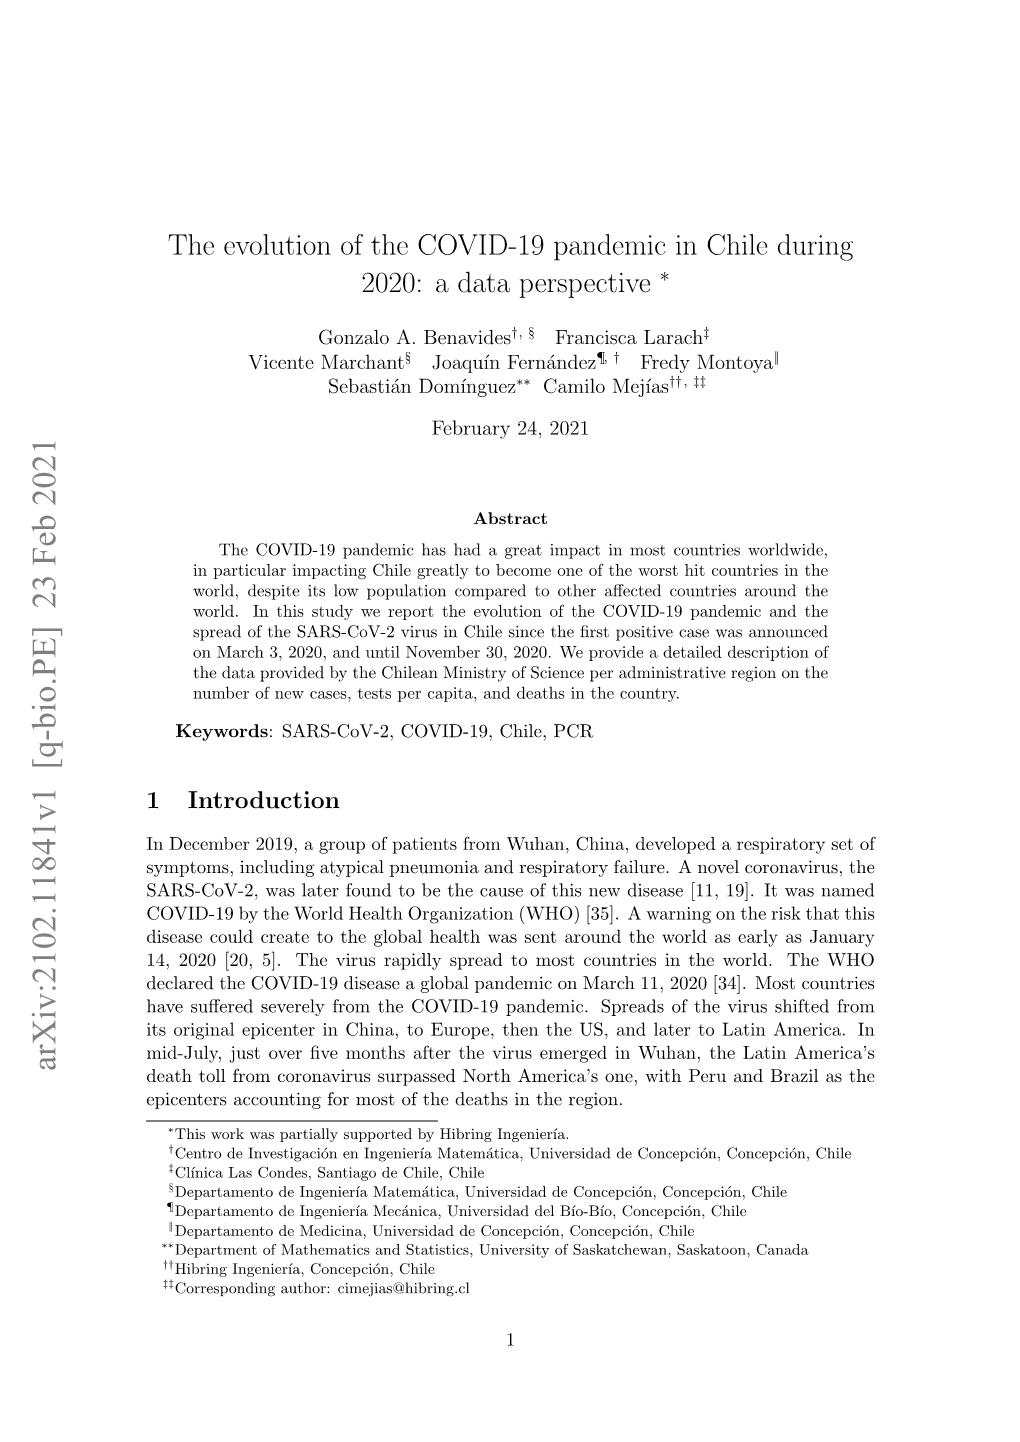 The Evolution of the COVID-19 Pandemic in Chile During 2020: a Data Perspective ∗